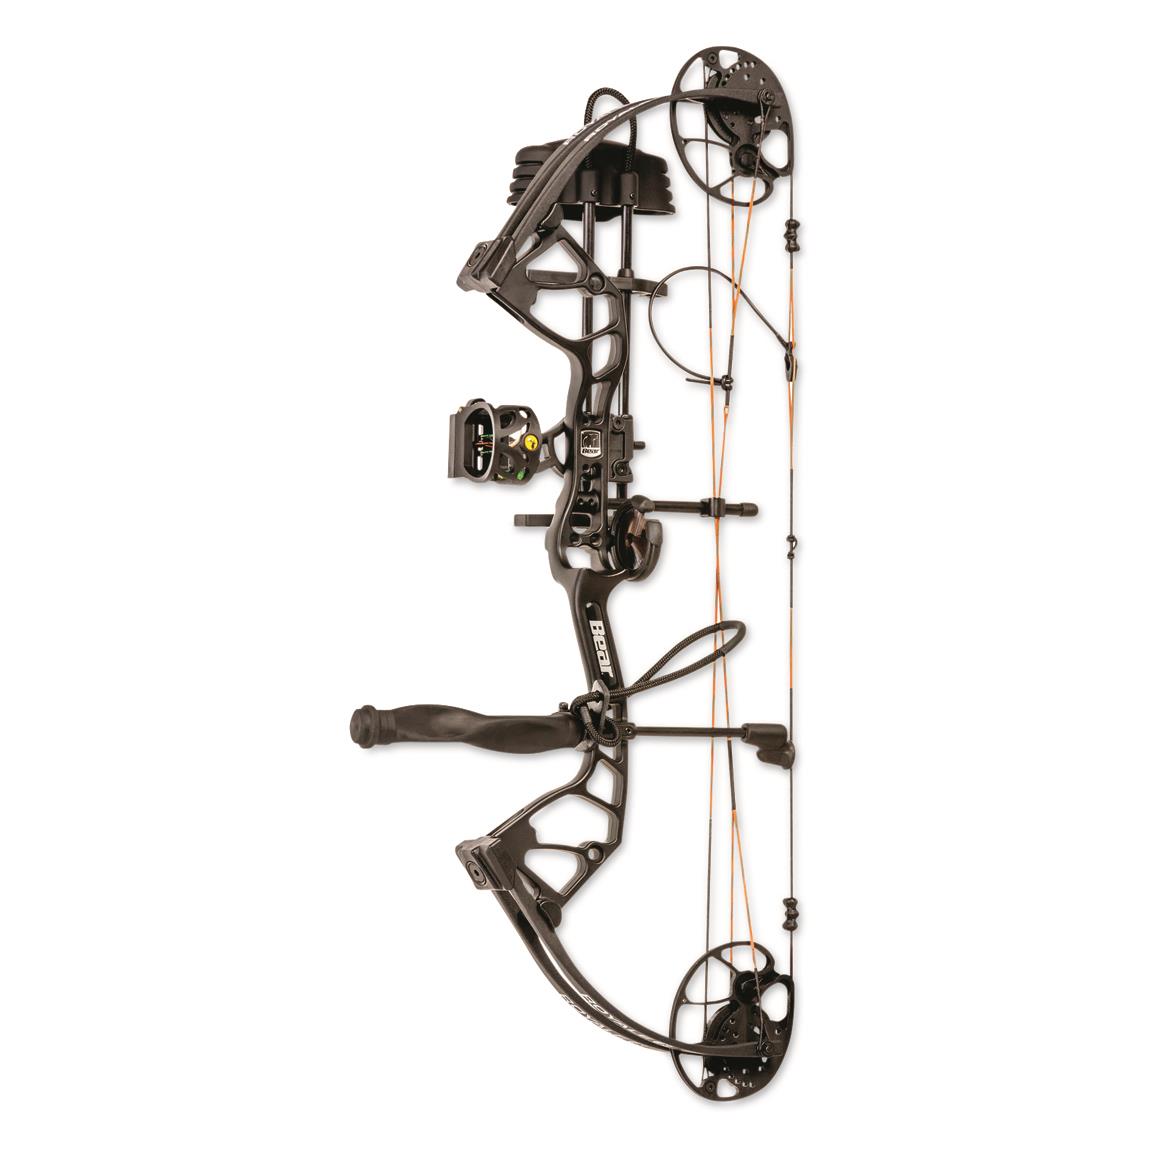 Bear Archery Royale Ready-to-Hunt Extra Compound Bow Package, Right Hand, 5-50 lbs.